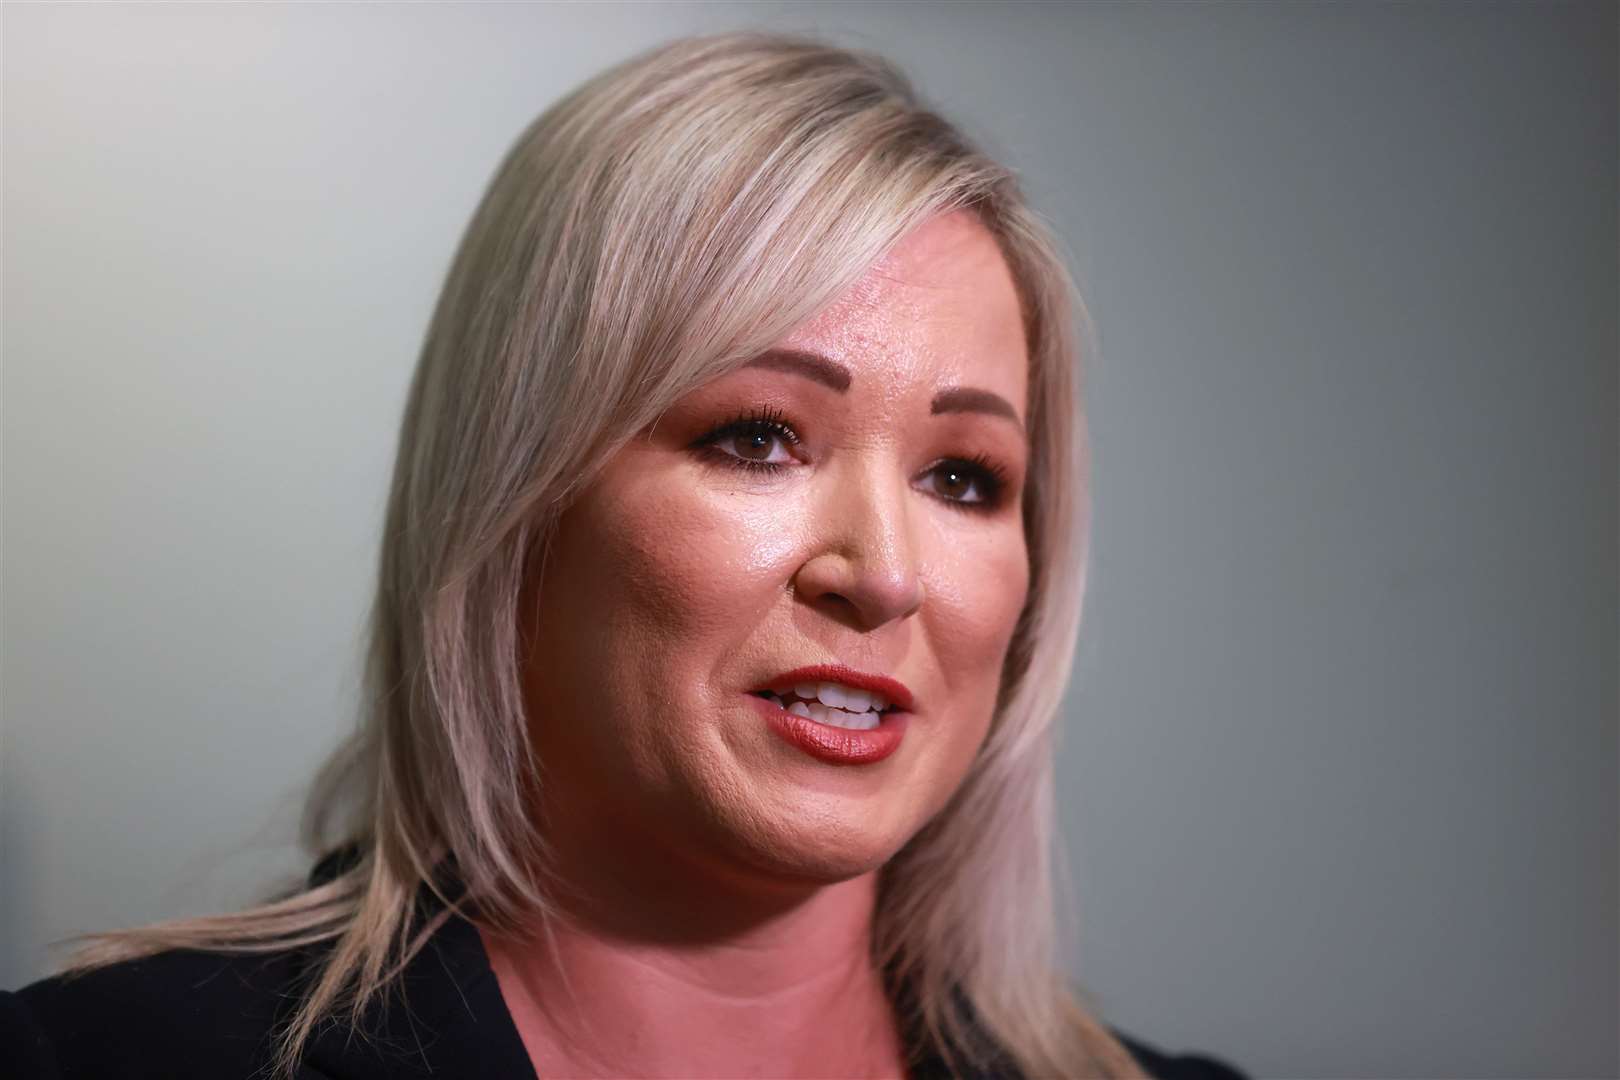 Sinn Fein Stormont leader Michelle O’Neill has called on the DUP to end its blockade (Liam McBurney/PA)